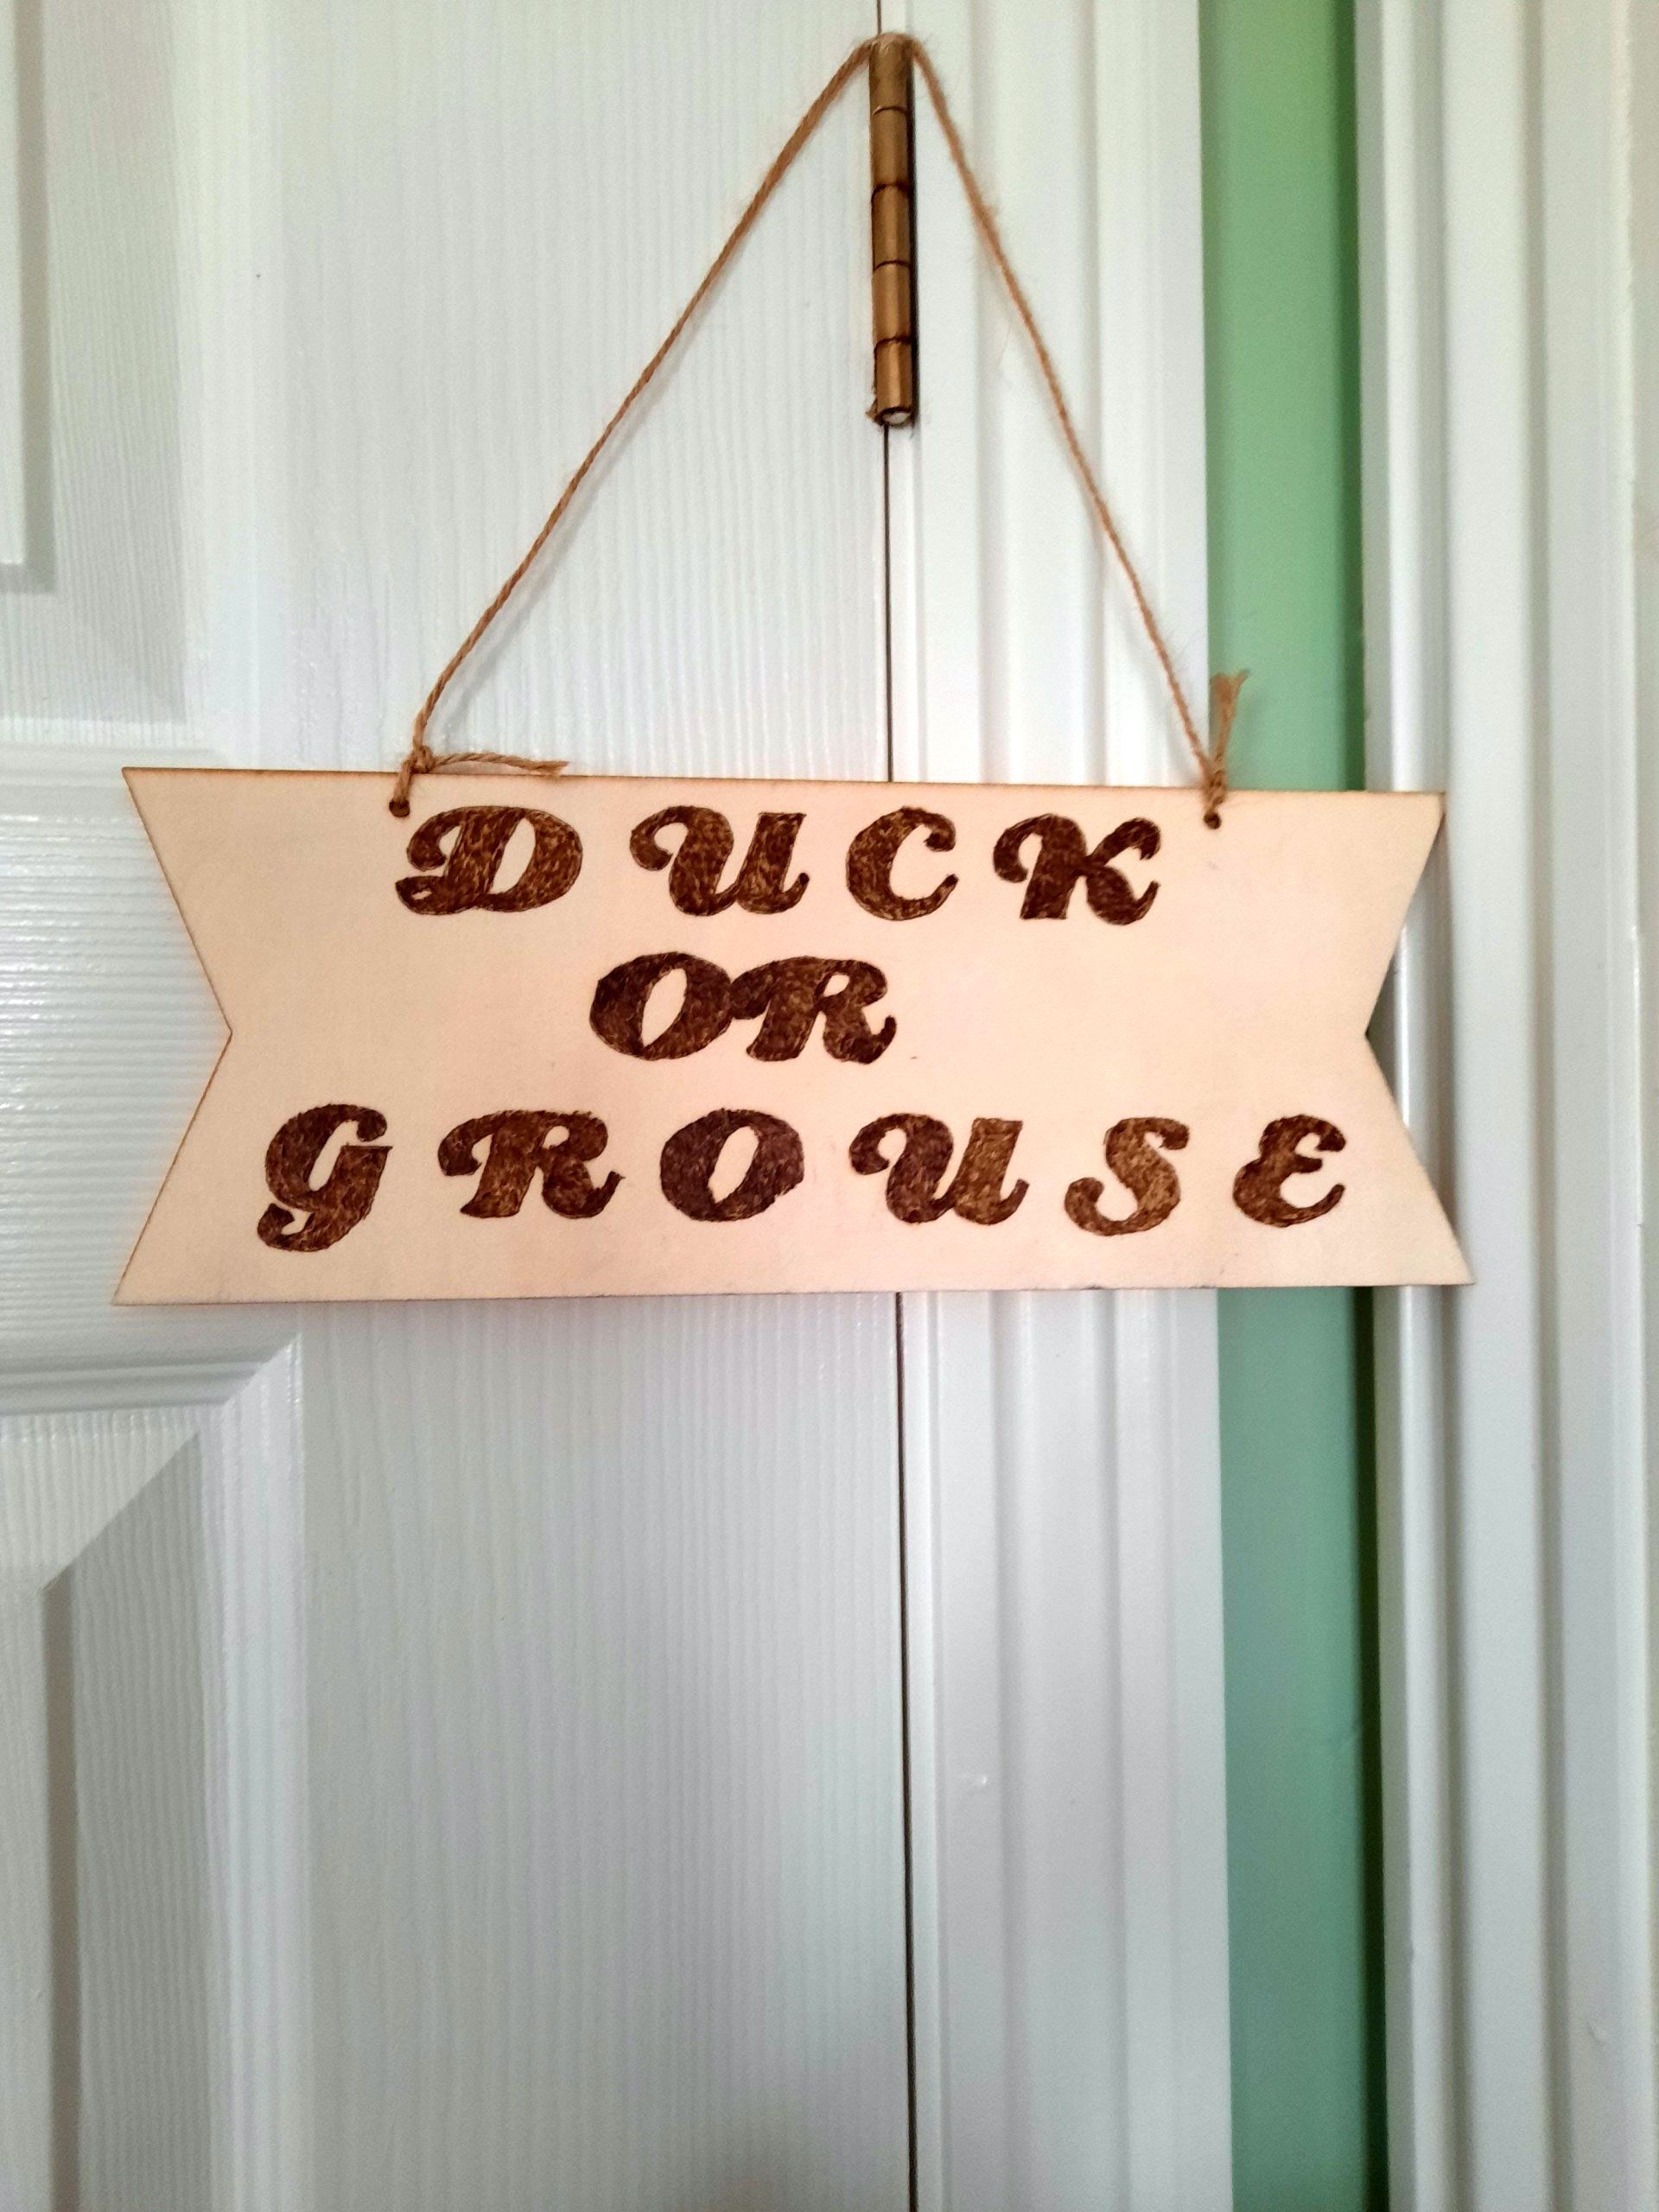 Duck or Grouse sign - to put on low ceilings as head height warning